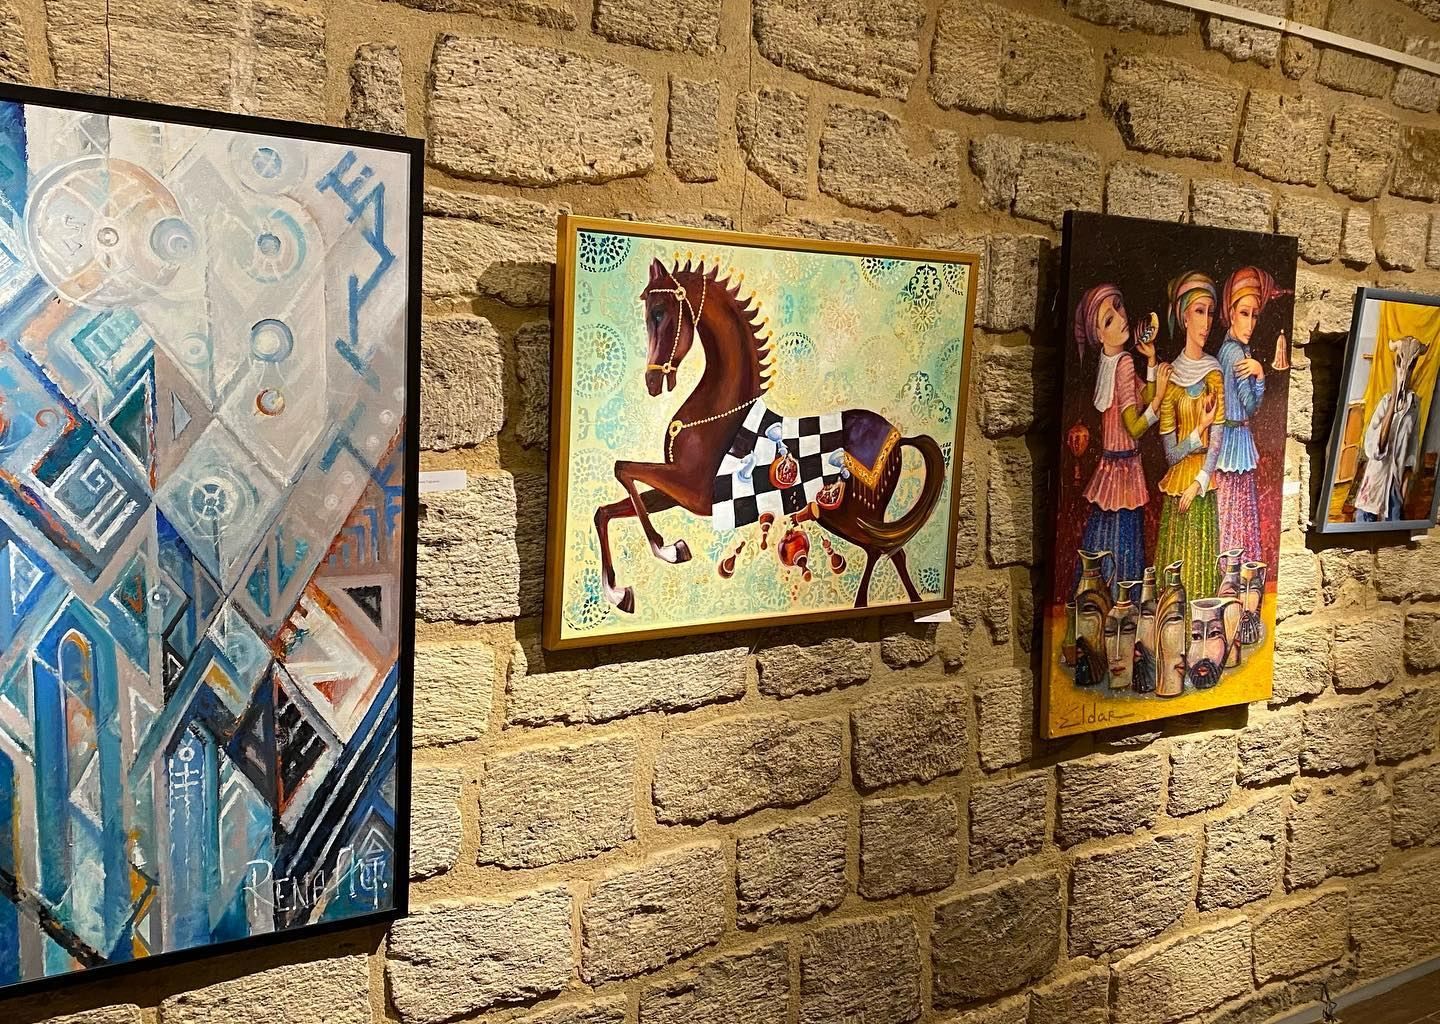 Stunning art pieces on display in Old City [PHOTO]